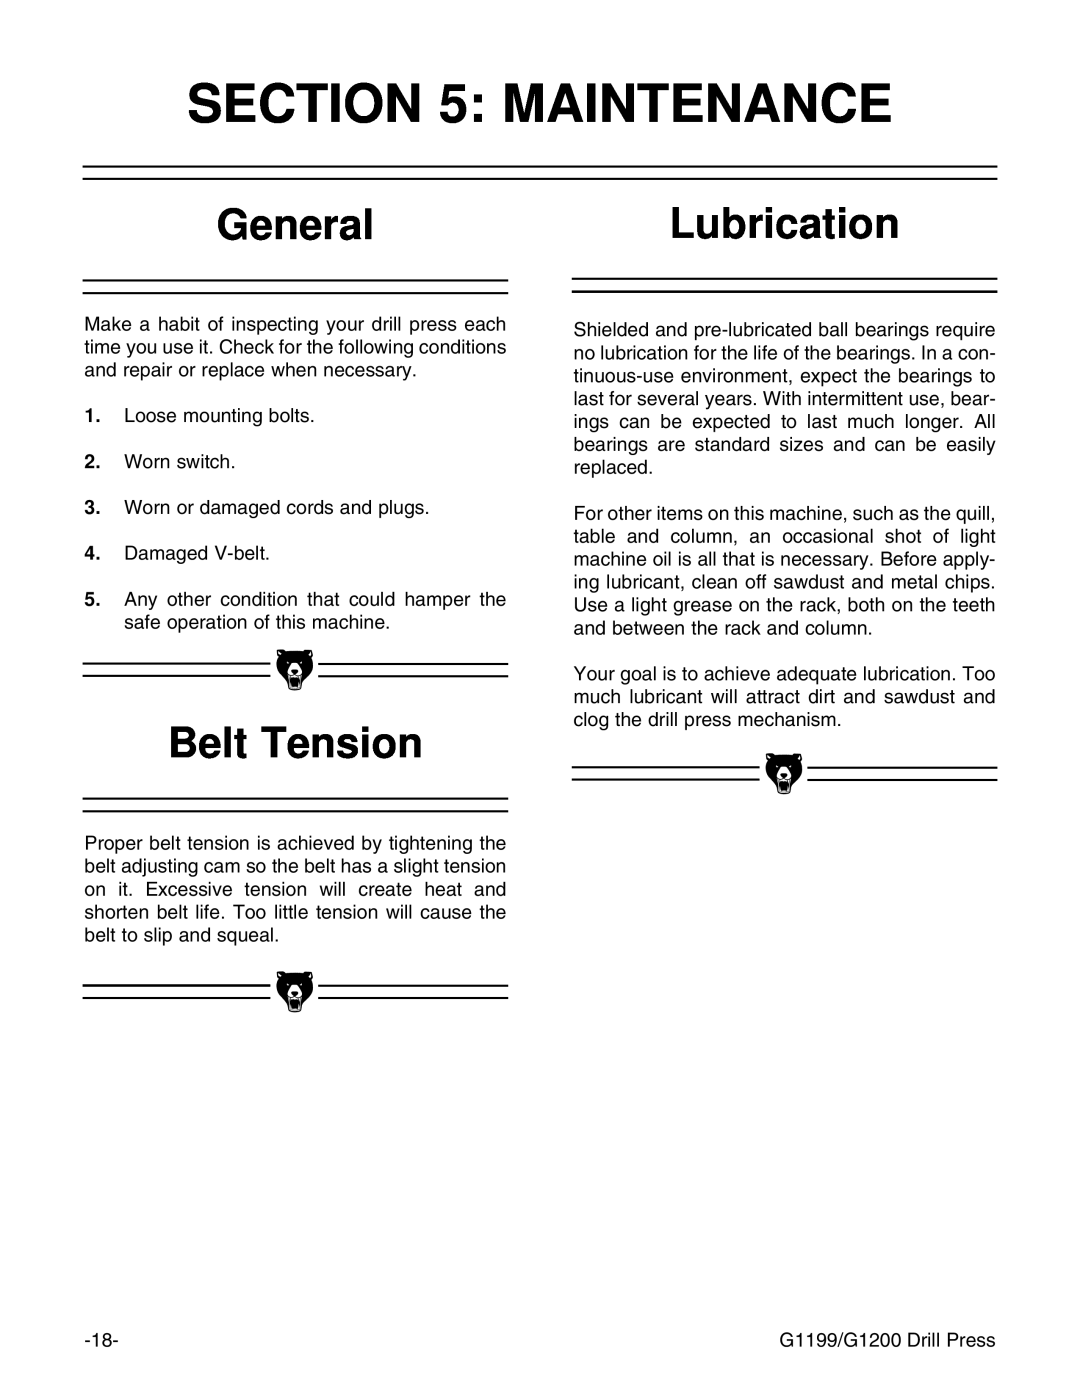 Grizzly G1199, G1200 instruction manual Maintenance, GeneralLubrication, Belt Tension 